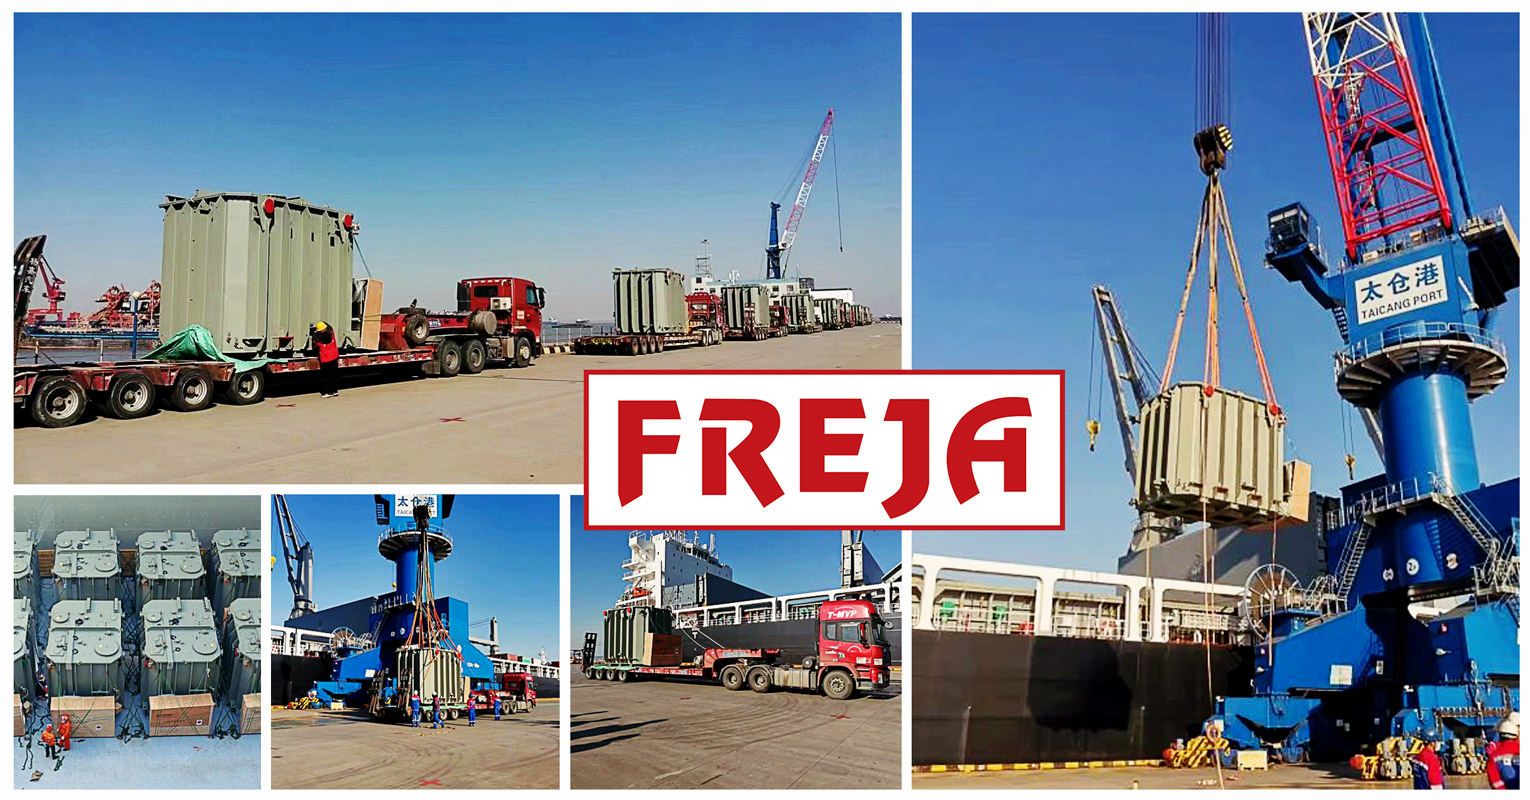 Freja Shanghai Loaded 8 Sets of Transformers & Accessories in Taicang for Africa